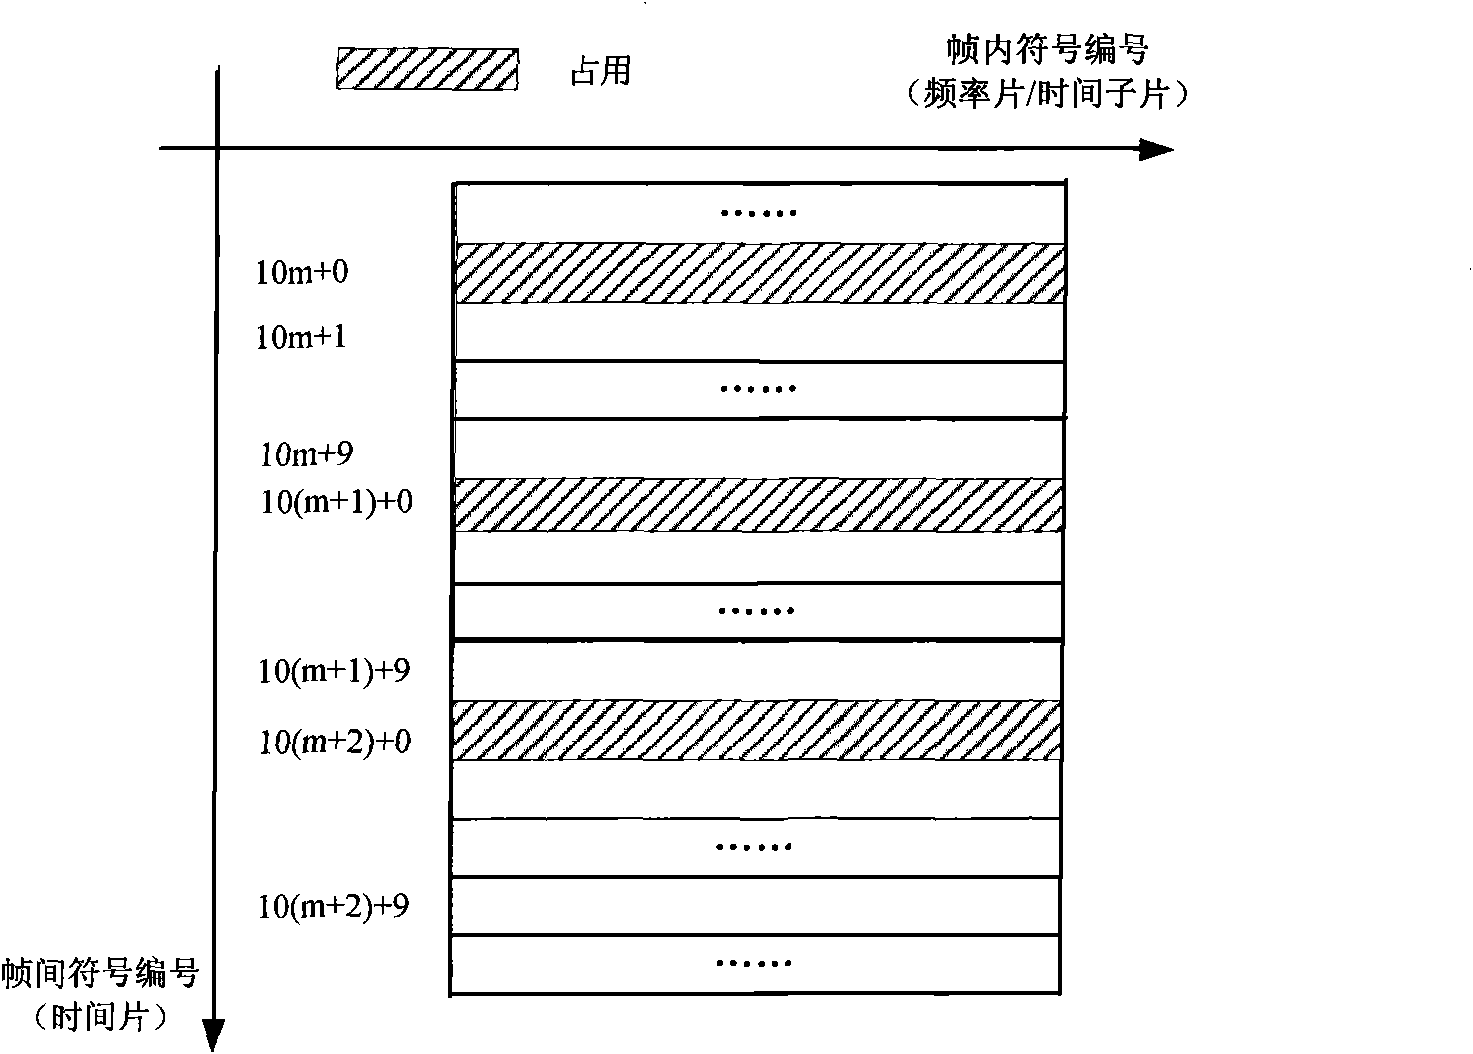 Physical-layer sub-channel allocation method, emission system and receiving system